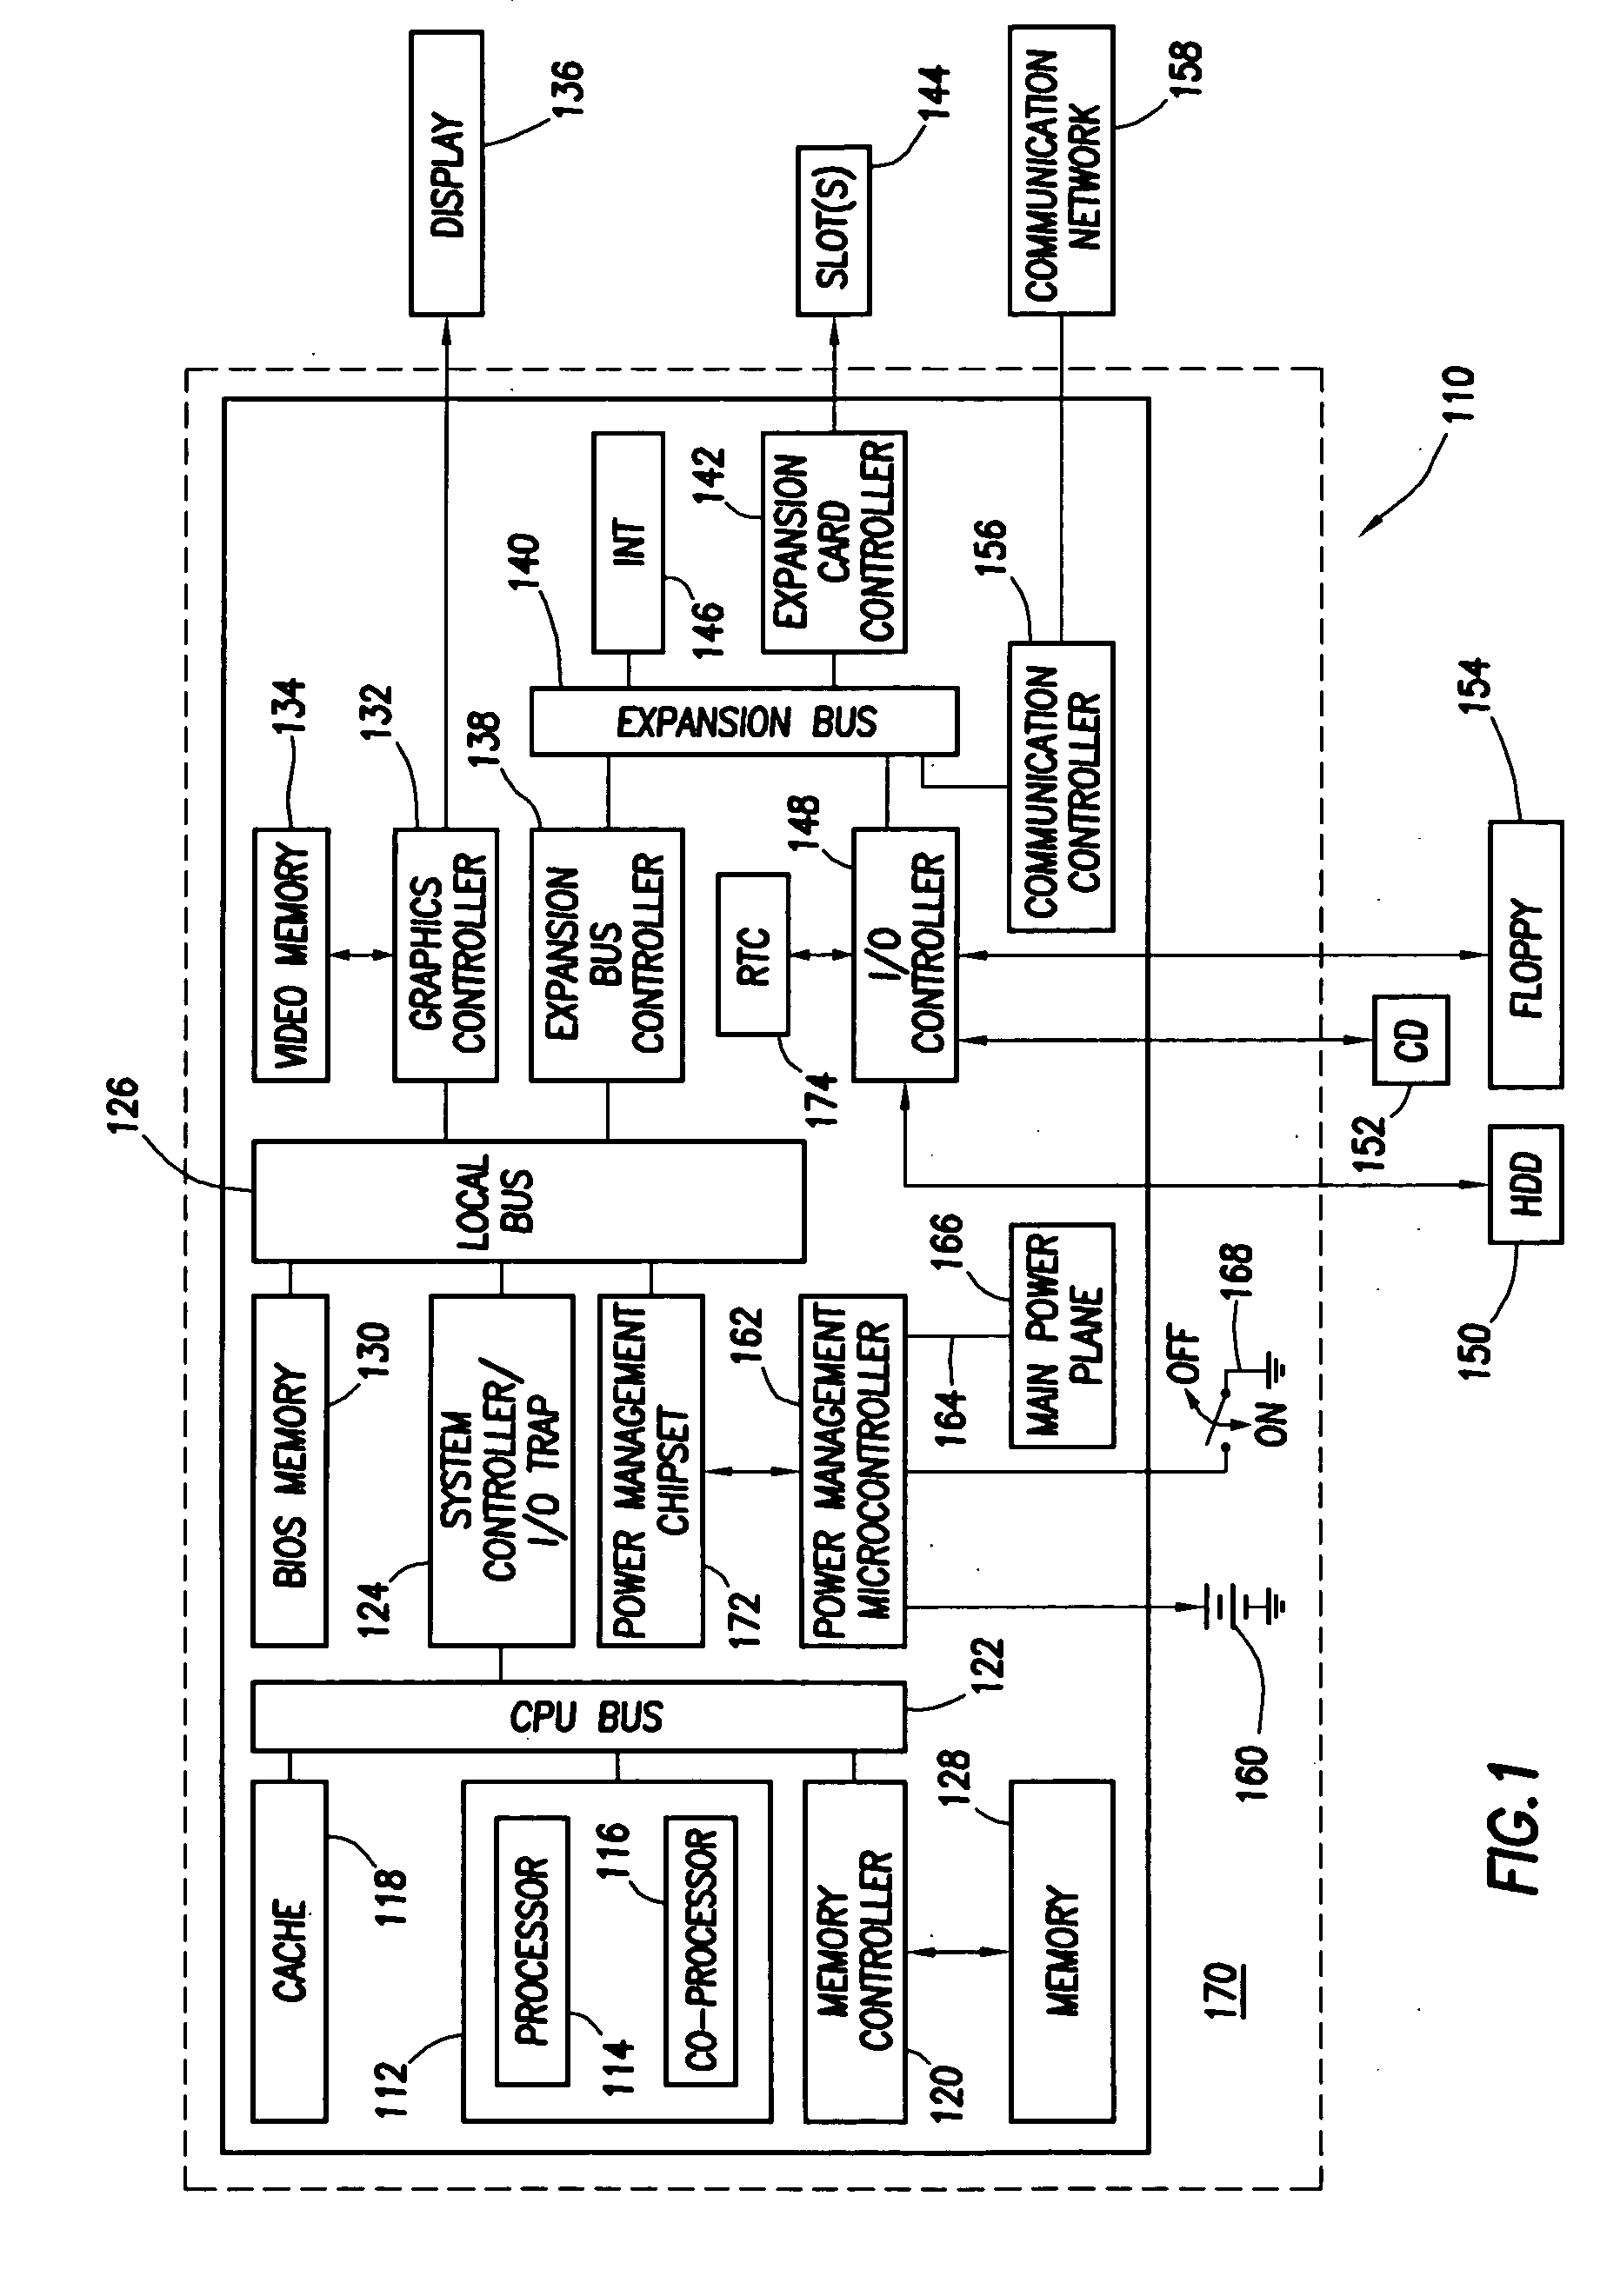 Method to encapsulate SNMP over serial attached SCSI for network management operations to manage external storage subsystems